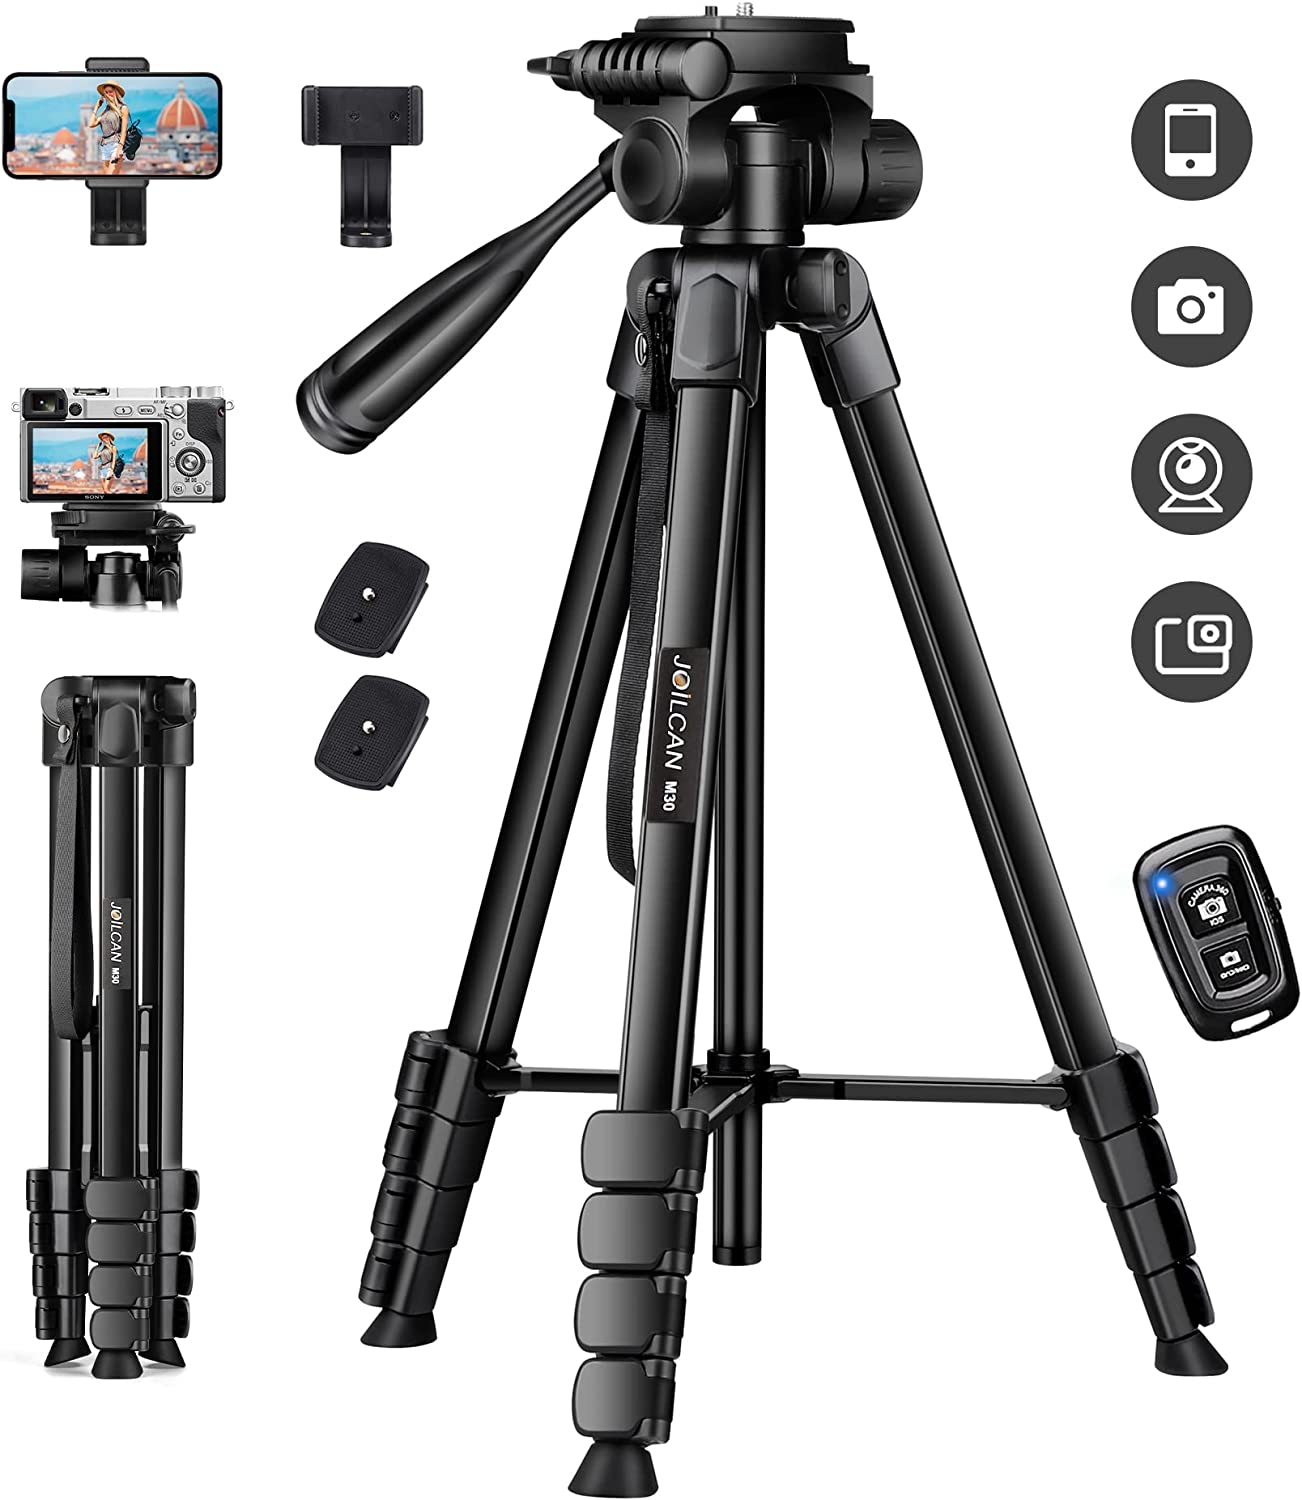 68" Phone Tripod, Camera Tripod Stand for Phone Photos Video, Travel Floor Tripods Compatible with iPhone Canon Nikon DSLR, Cell Phone Tripods with Remote/Travel Bag/Phone Holder(USA)